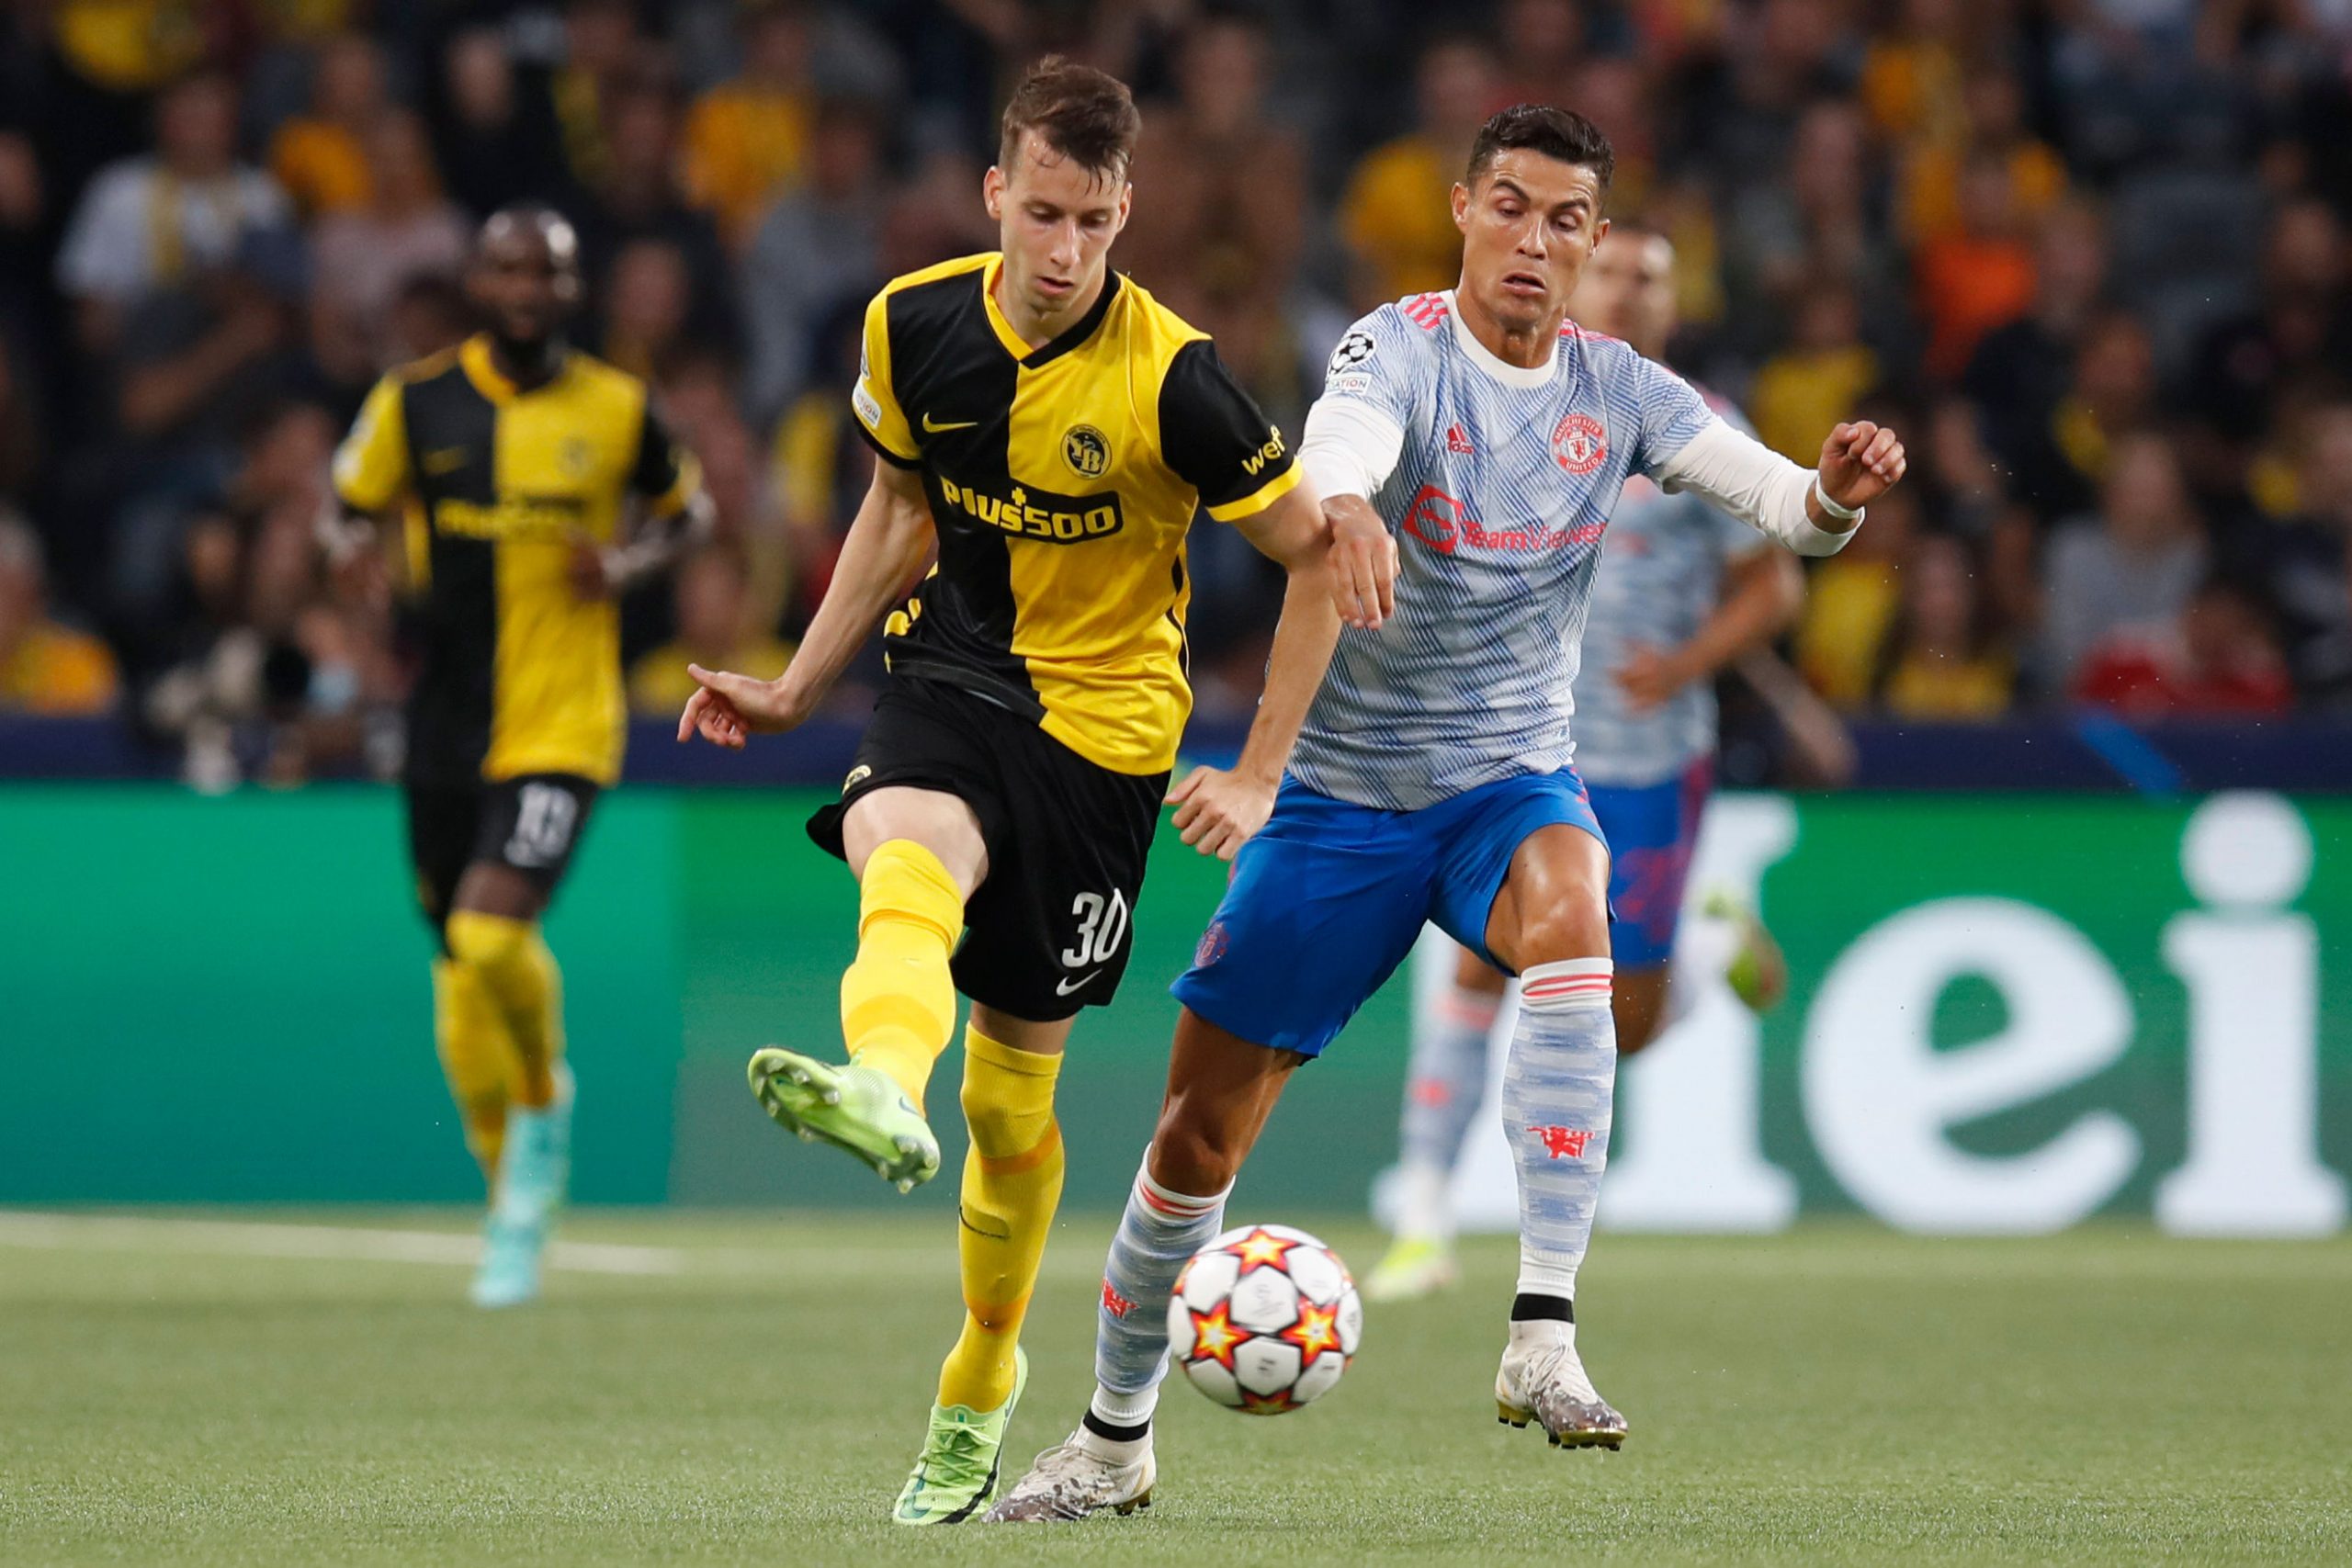 UCL: Young Boys defeat Manchester United 2-1 with a 94th-minute winner